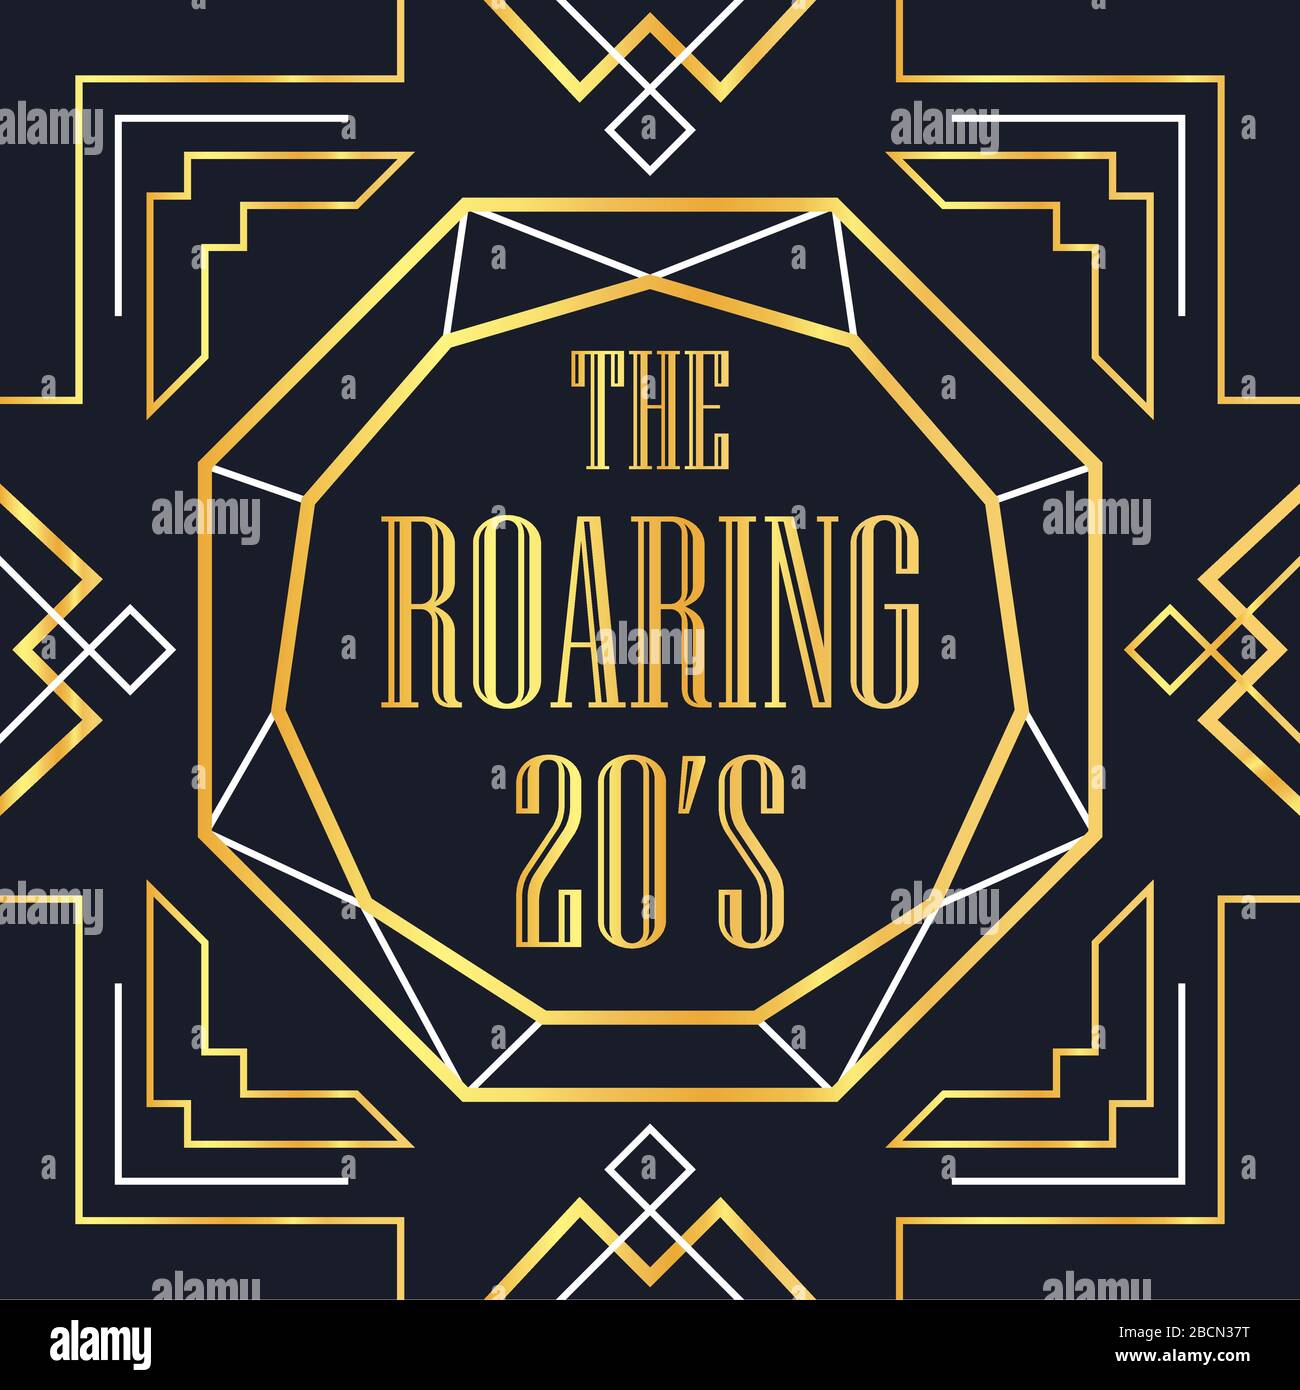 The roaring 20s background template in vintage art deco style. Gold and black retro frame with traditional geometric line decoration, text quote, orna Stock Vector